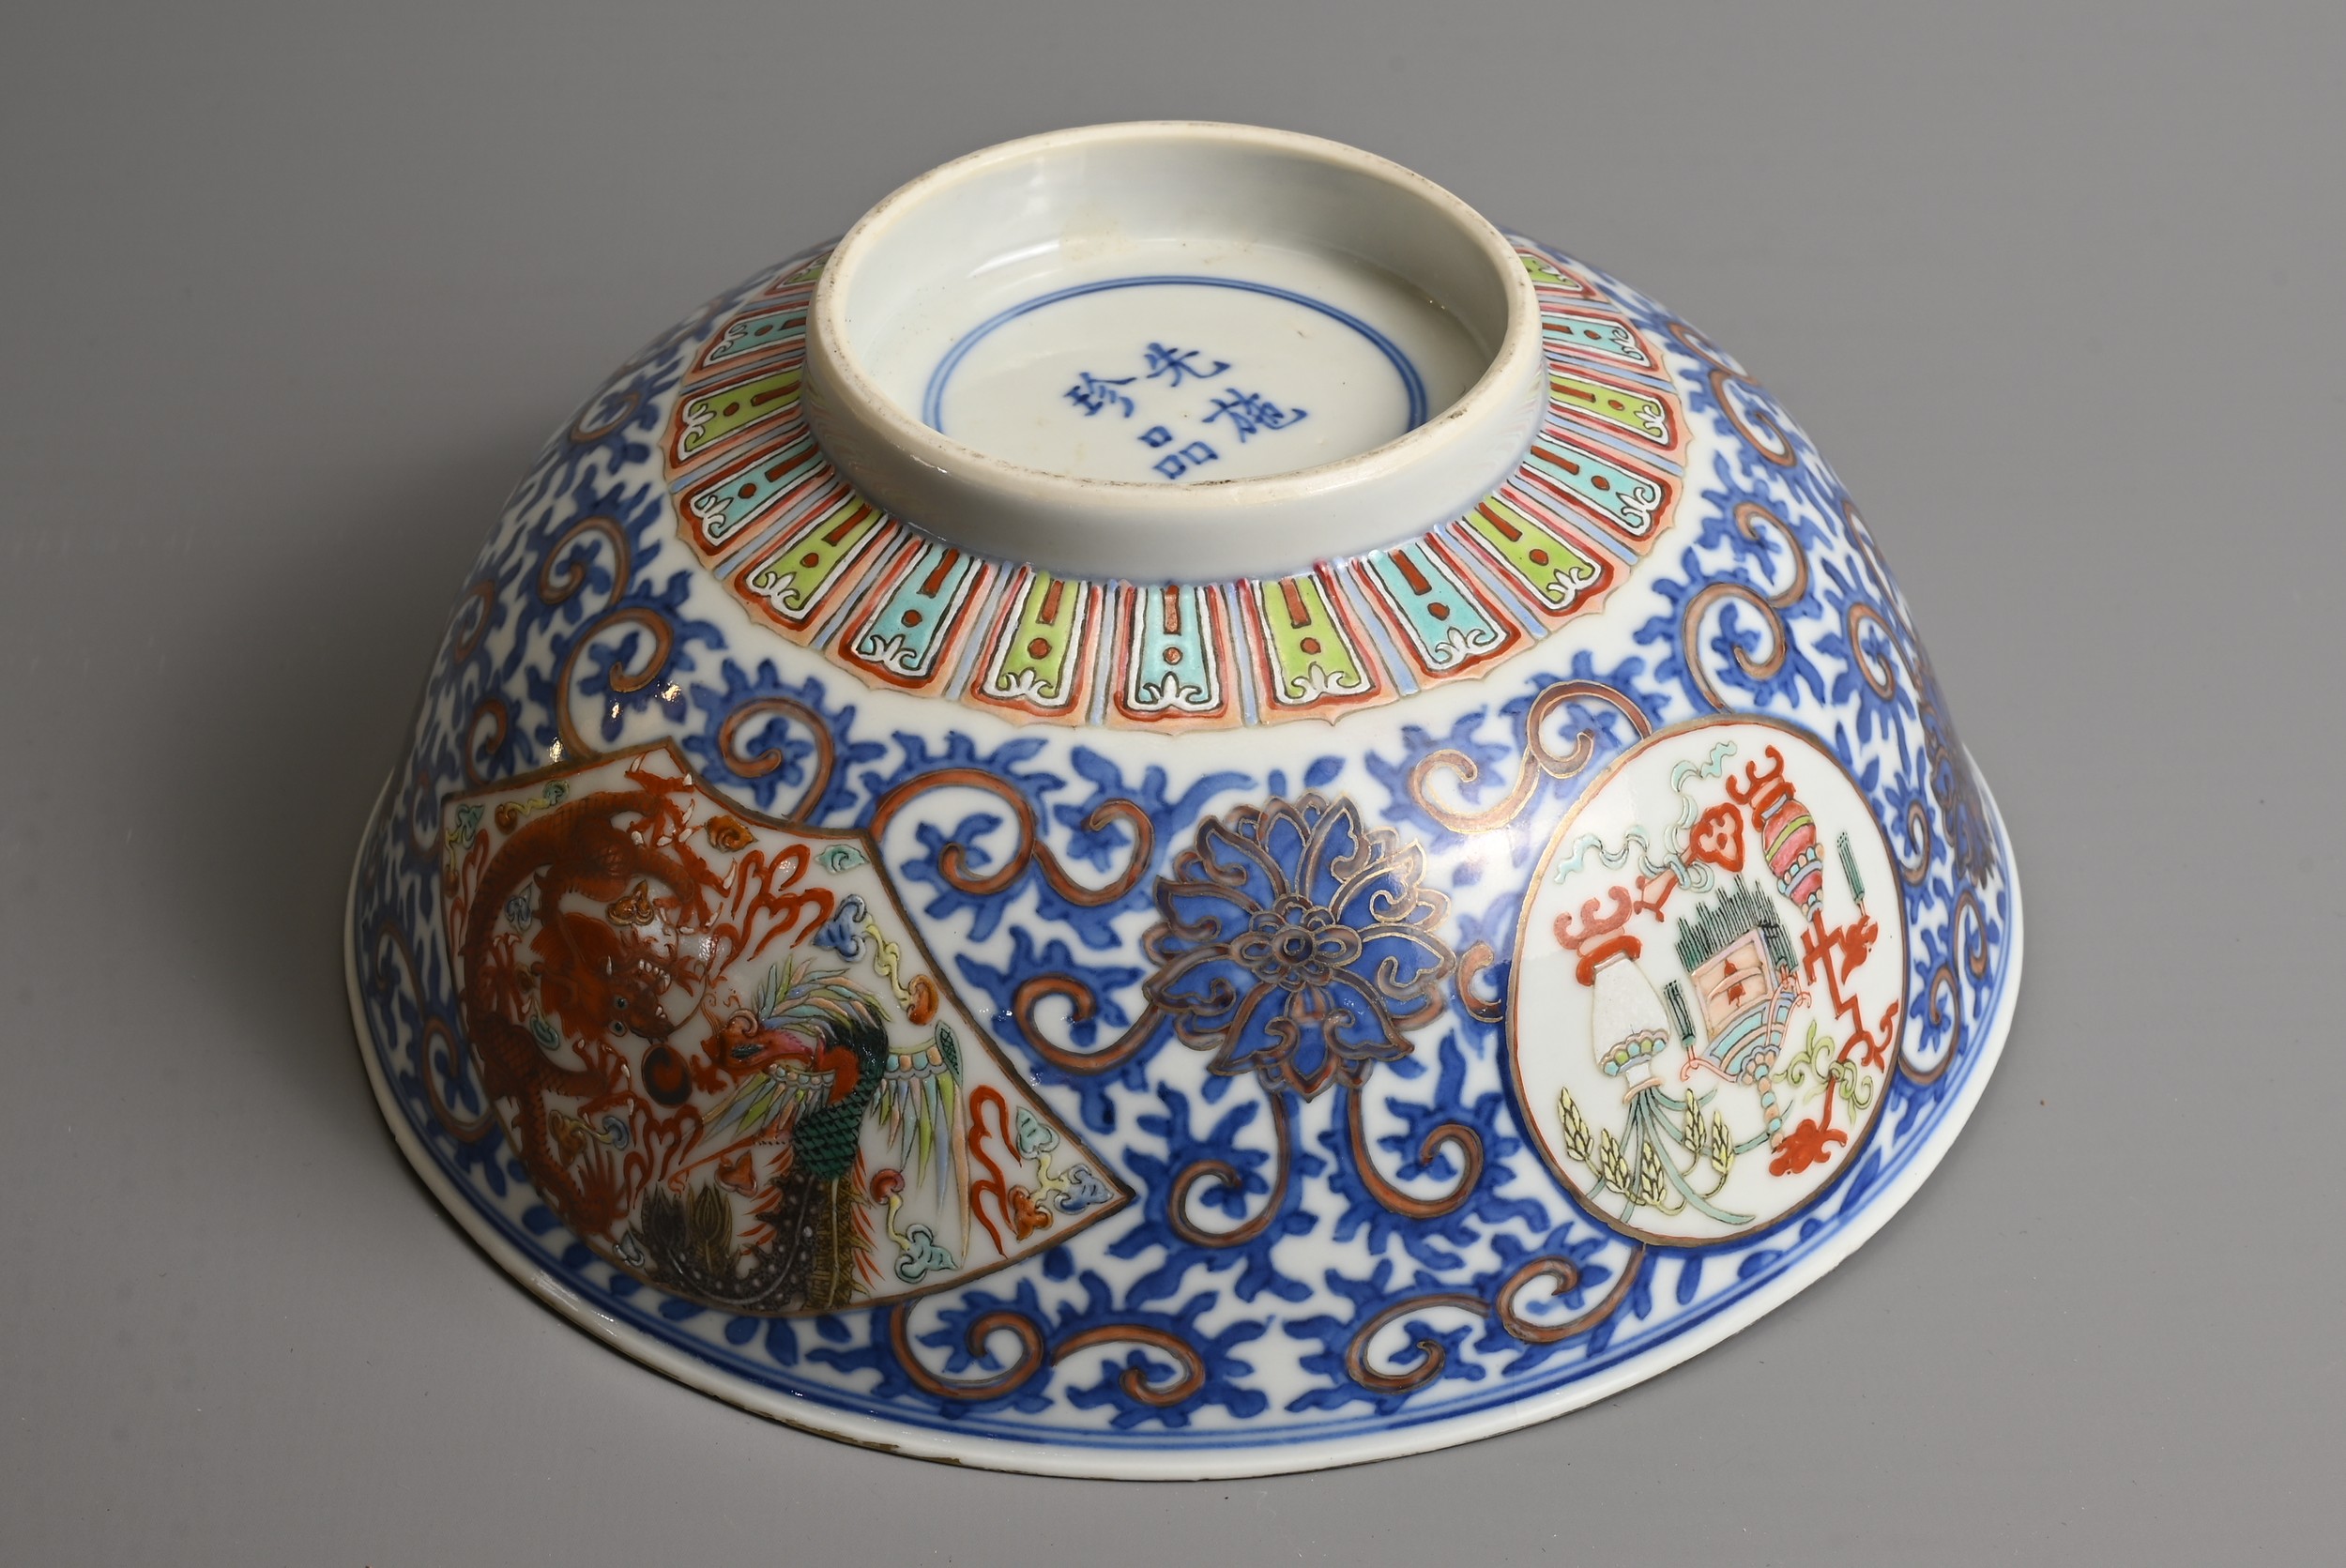 A CHINESE BLUE AND WHITE AND ENAMEL DECORATED PORCELAIN BOWL, LATE QING DYNASTY. Decorated with - Image 8 of 8